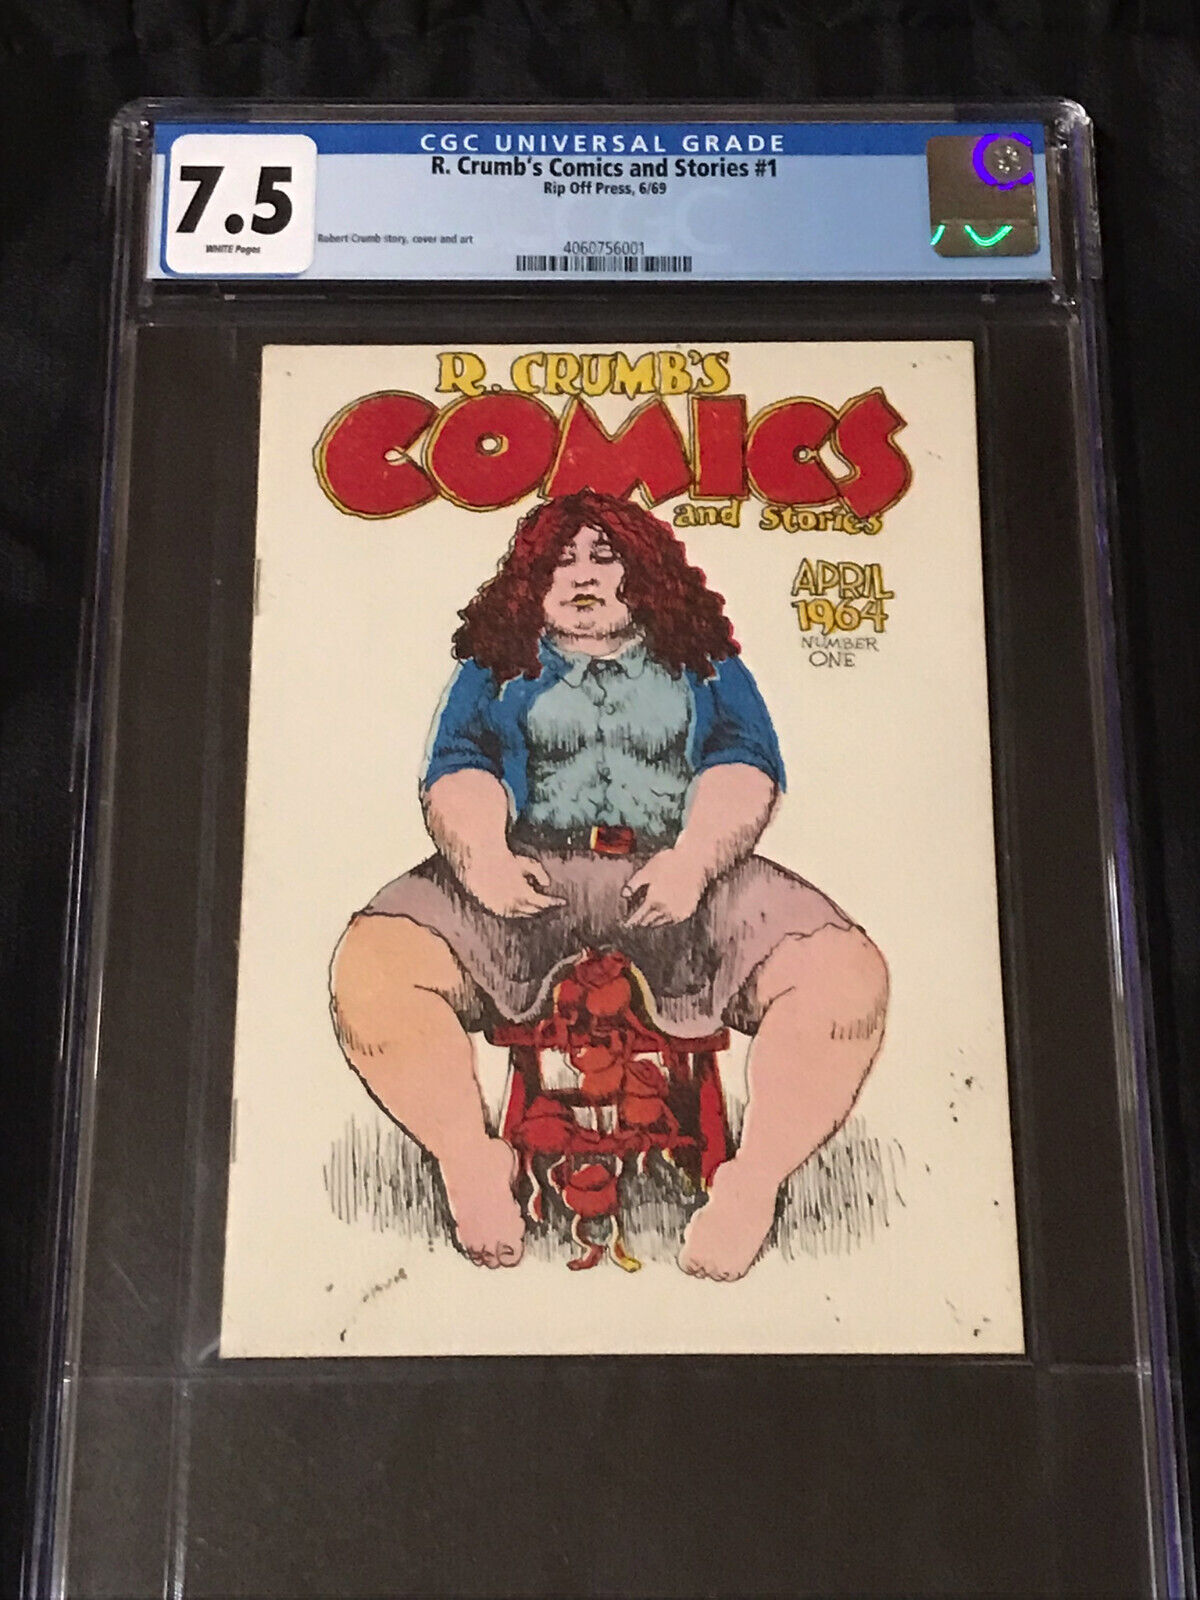 Rip Off Press 1969 R. Crumb\'s Comics and Stories #1 CGC 7.5 VF- with White Pages